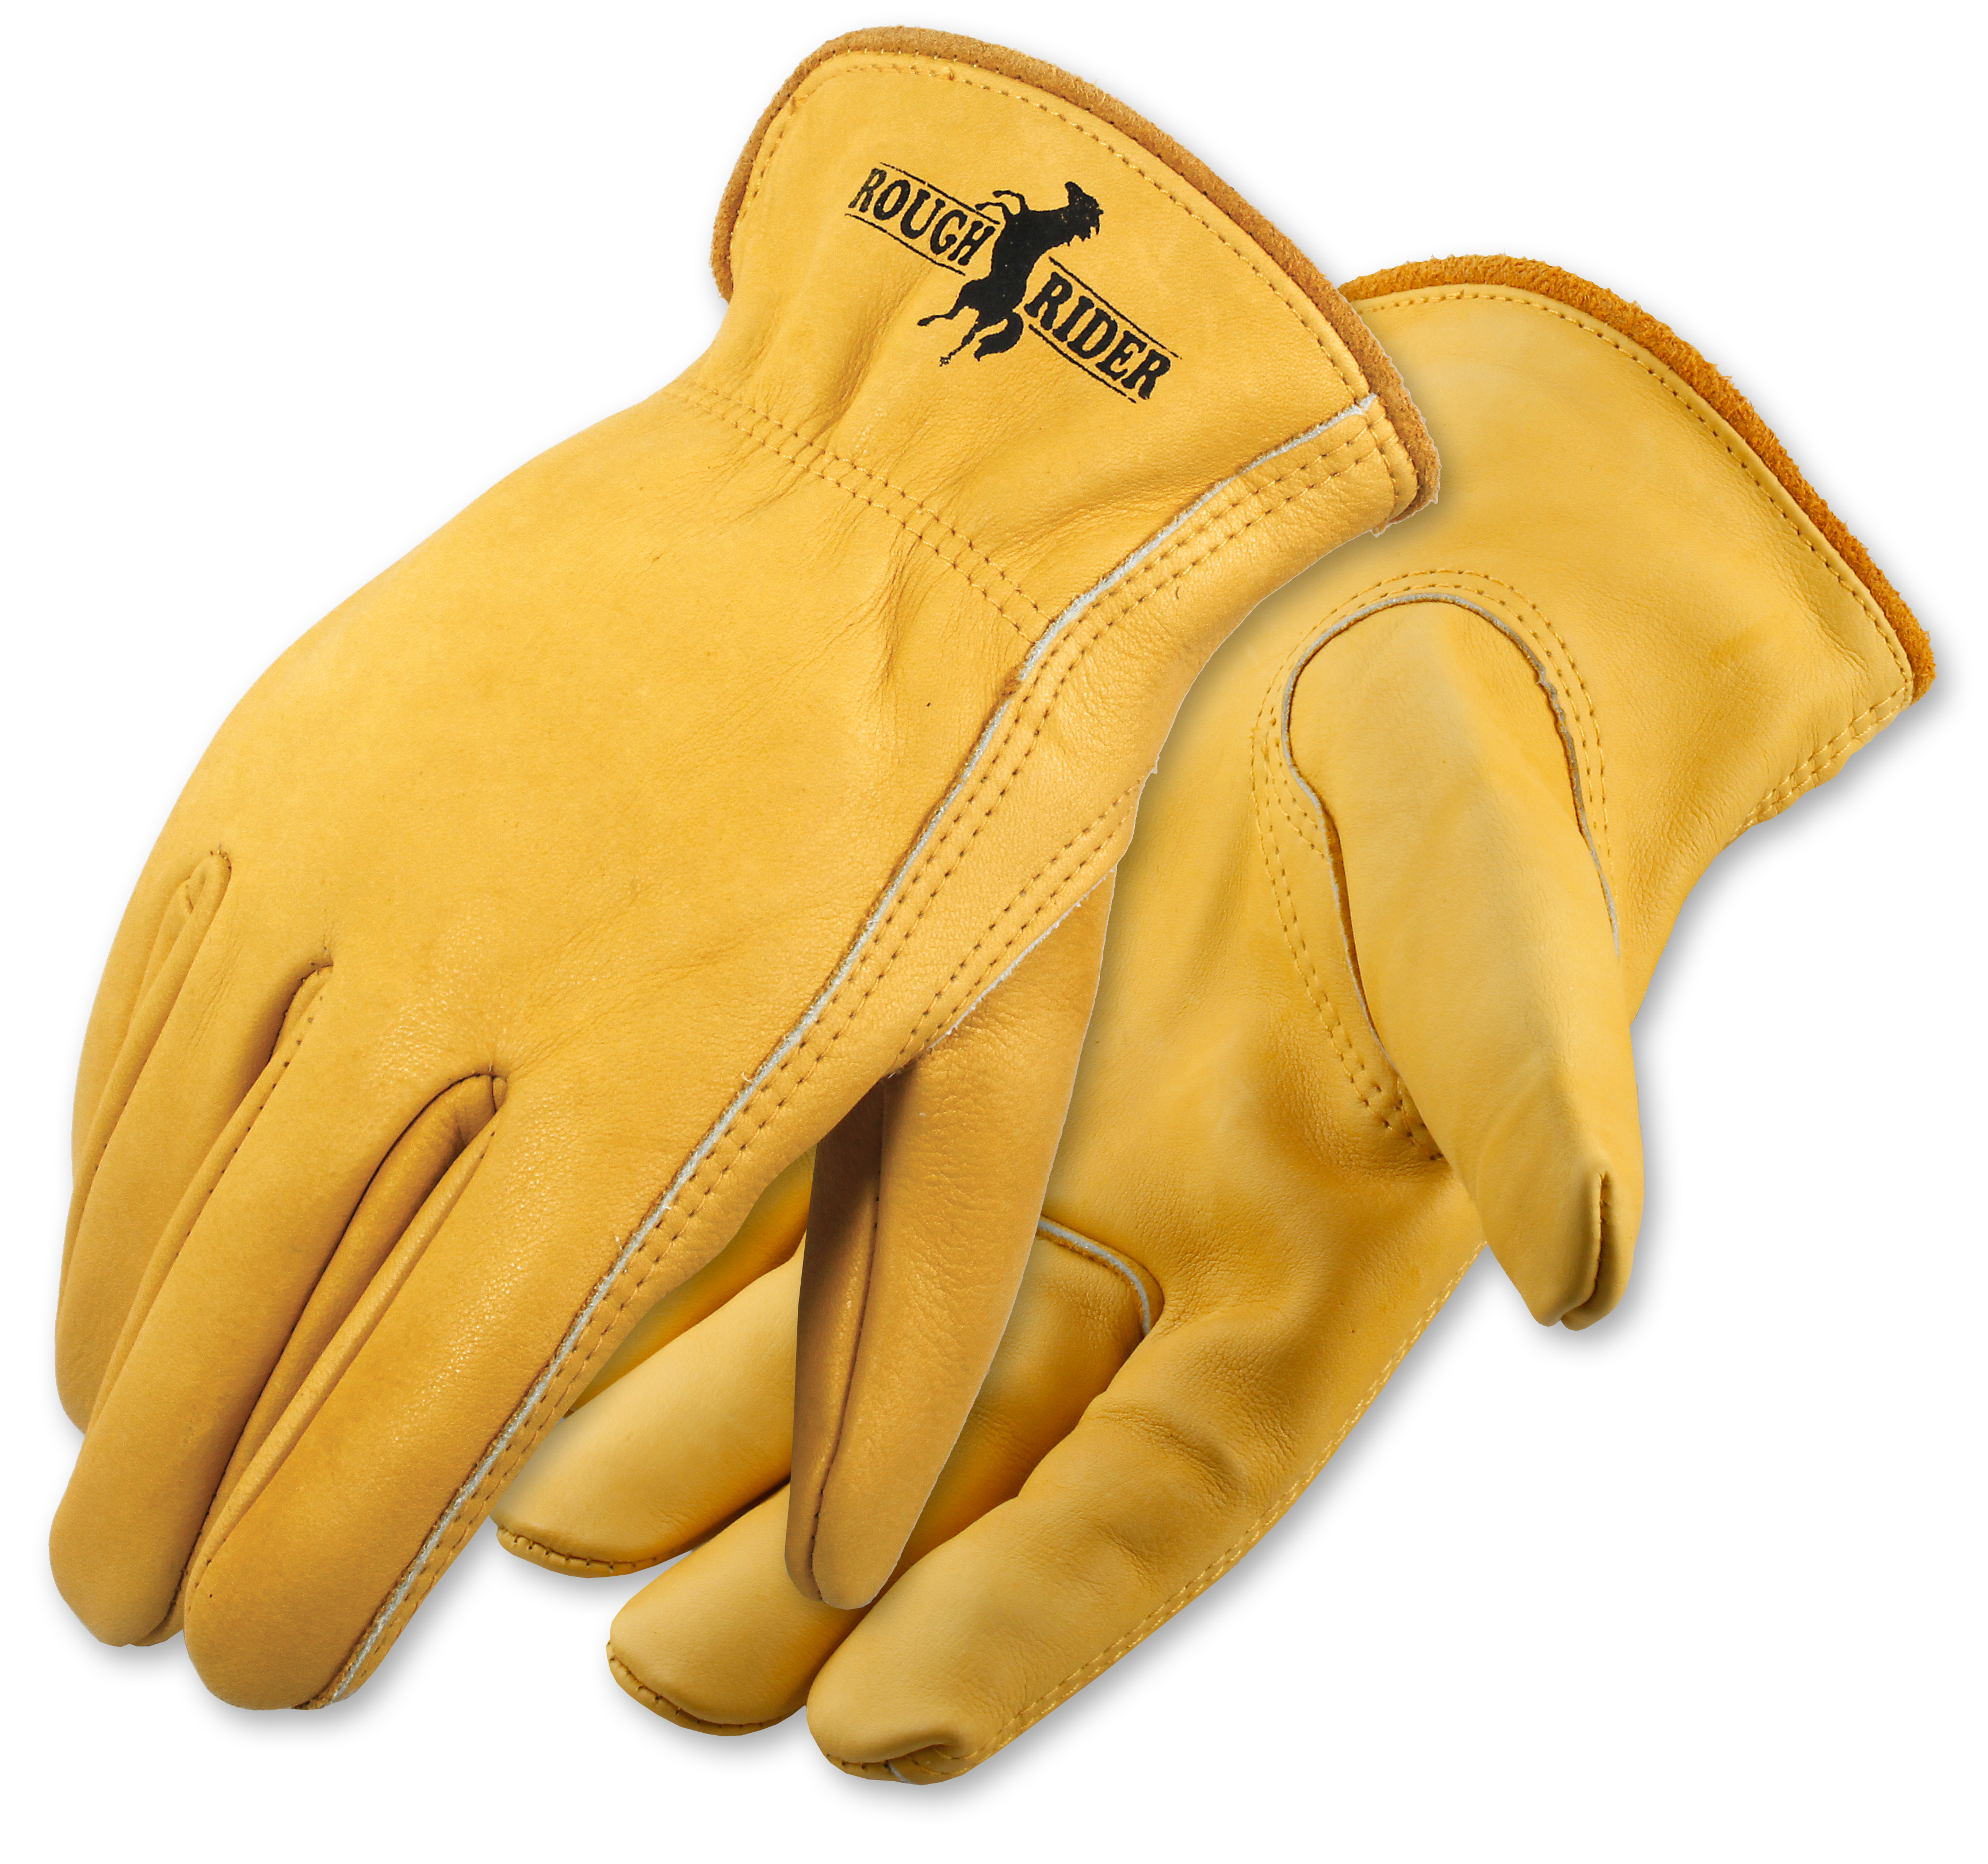 Rough Rider&reg; Drivers Gloves, Sewn with Cut Resistant Thread